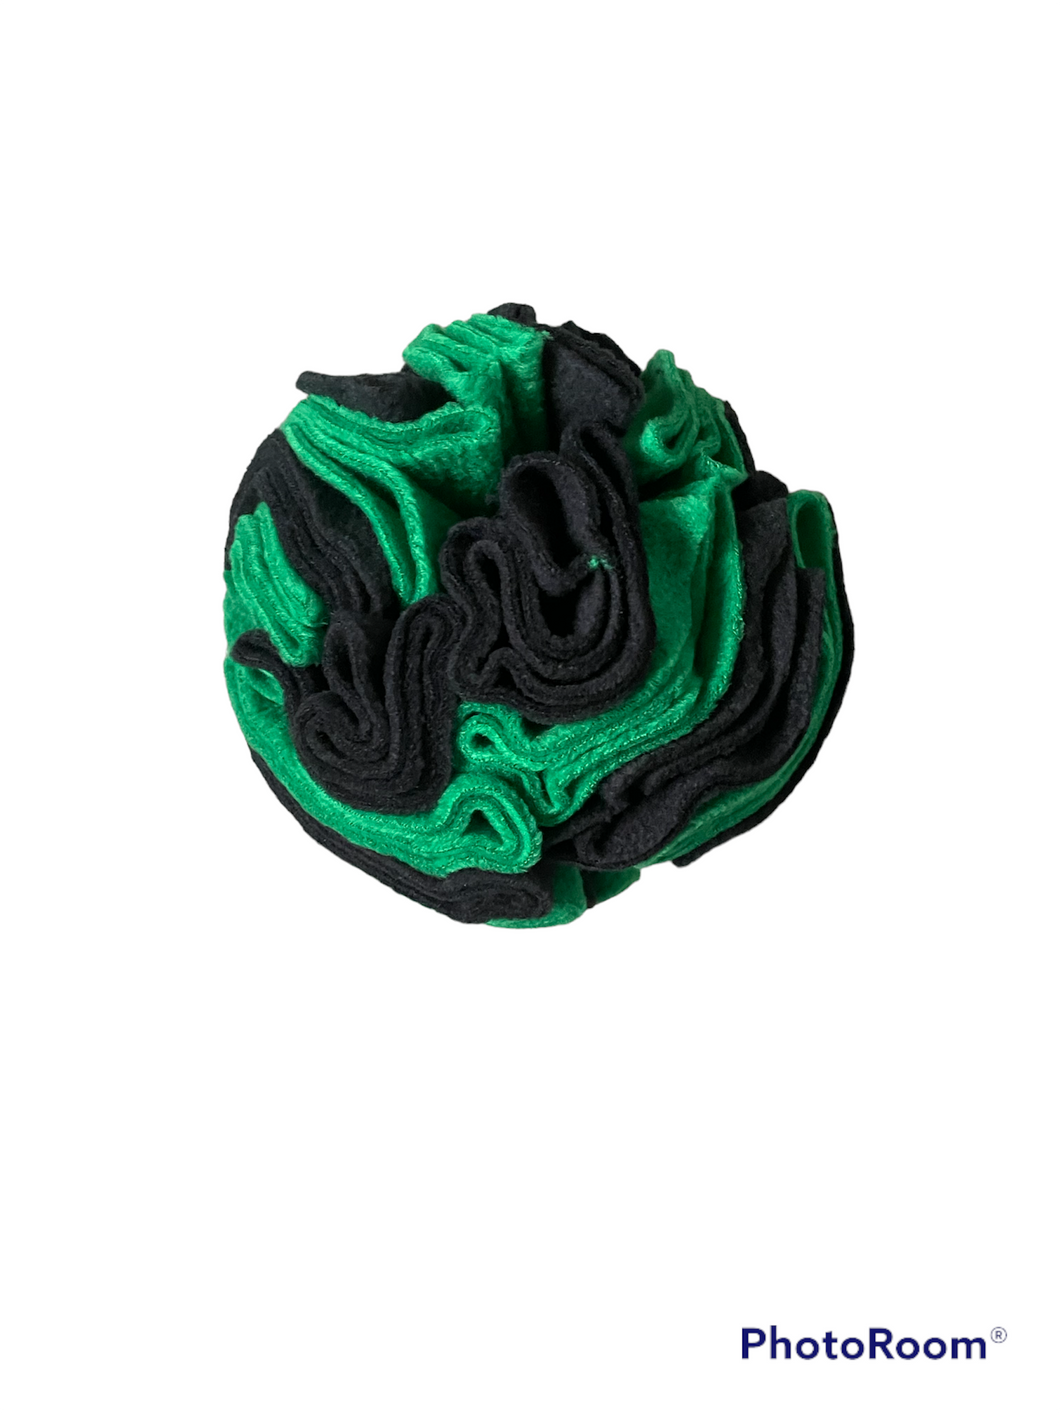 Snuffle ball black and green, 6 inch size